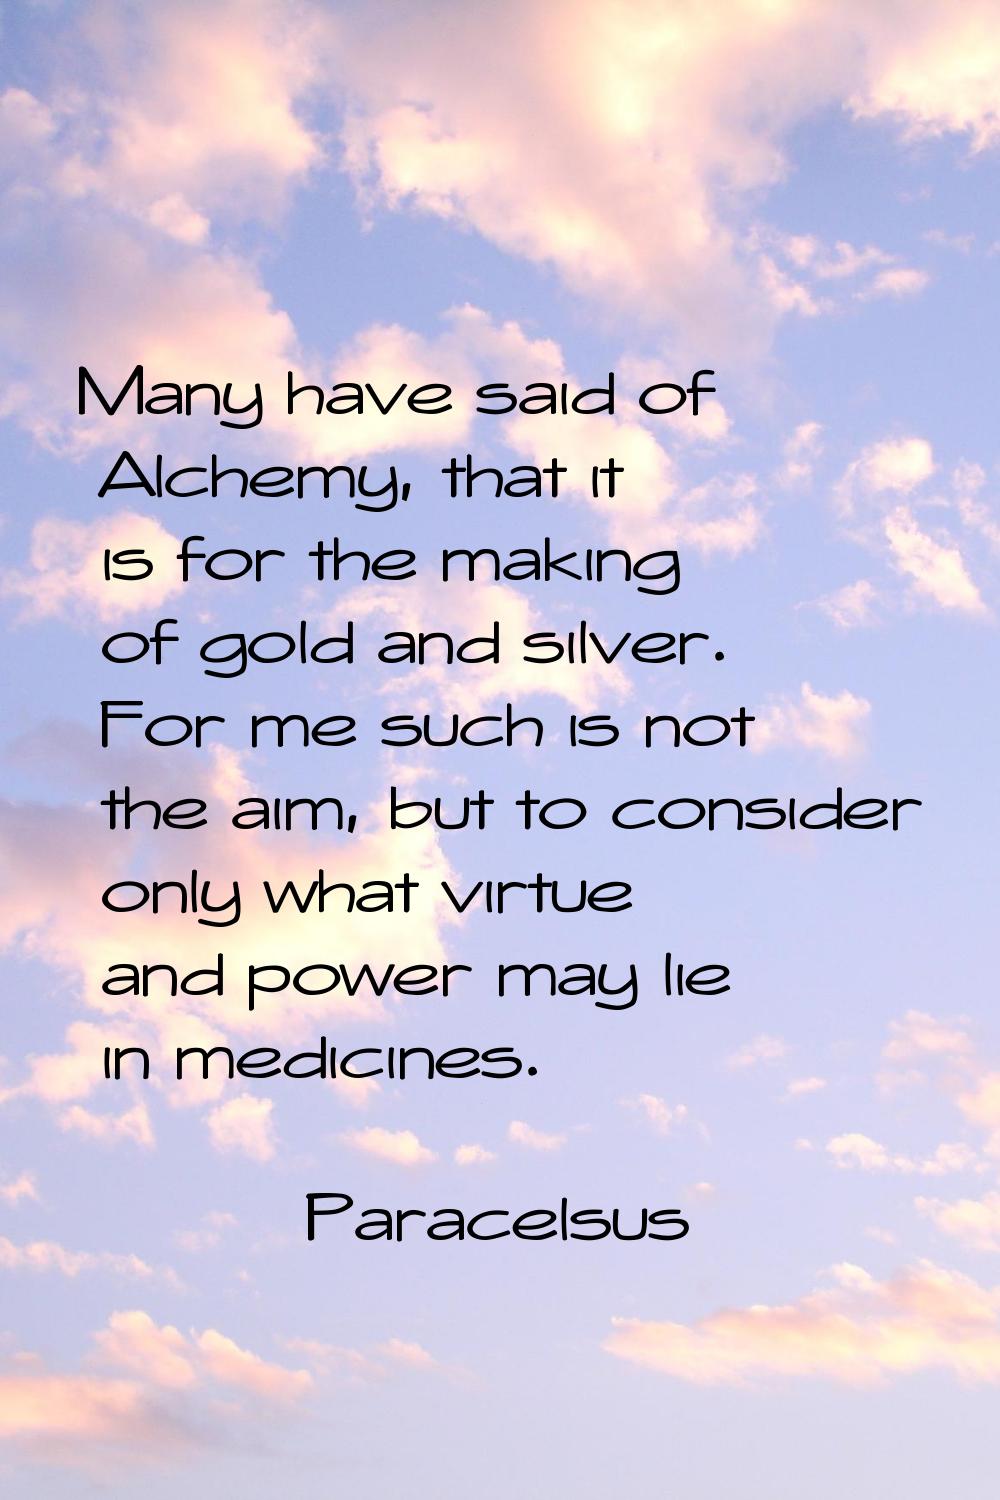 Many have said of Alchemy, that it is for the making of gold and silver. For me such is not the aim